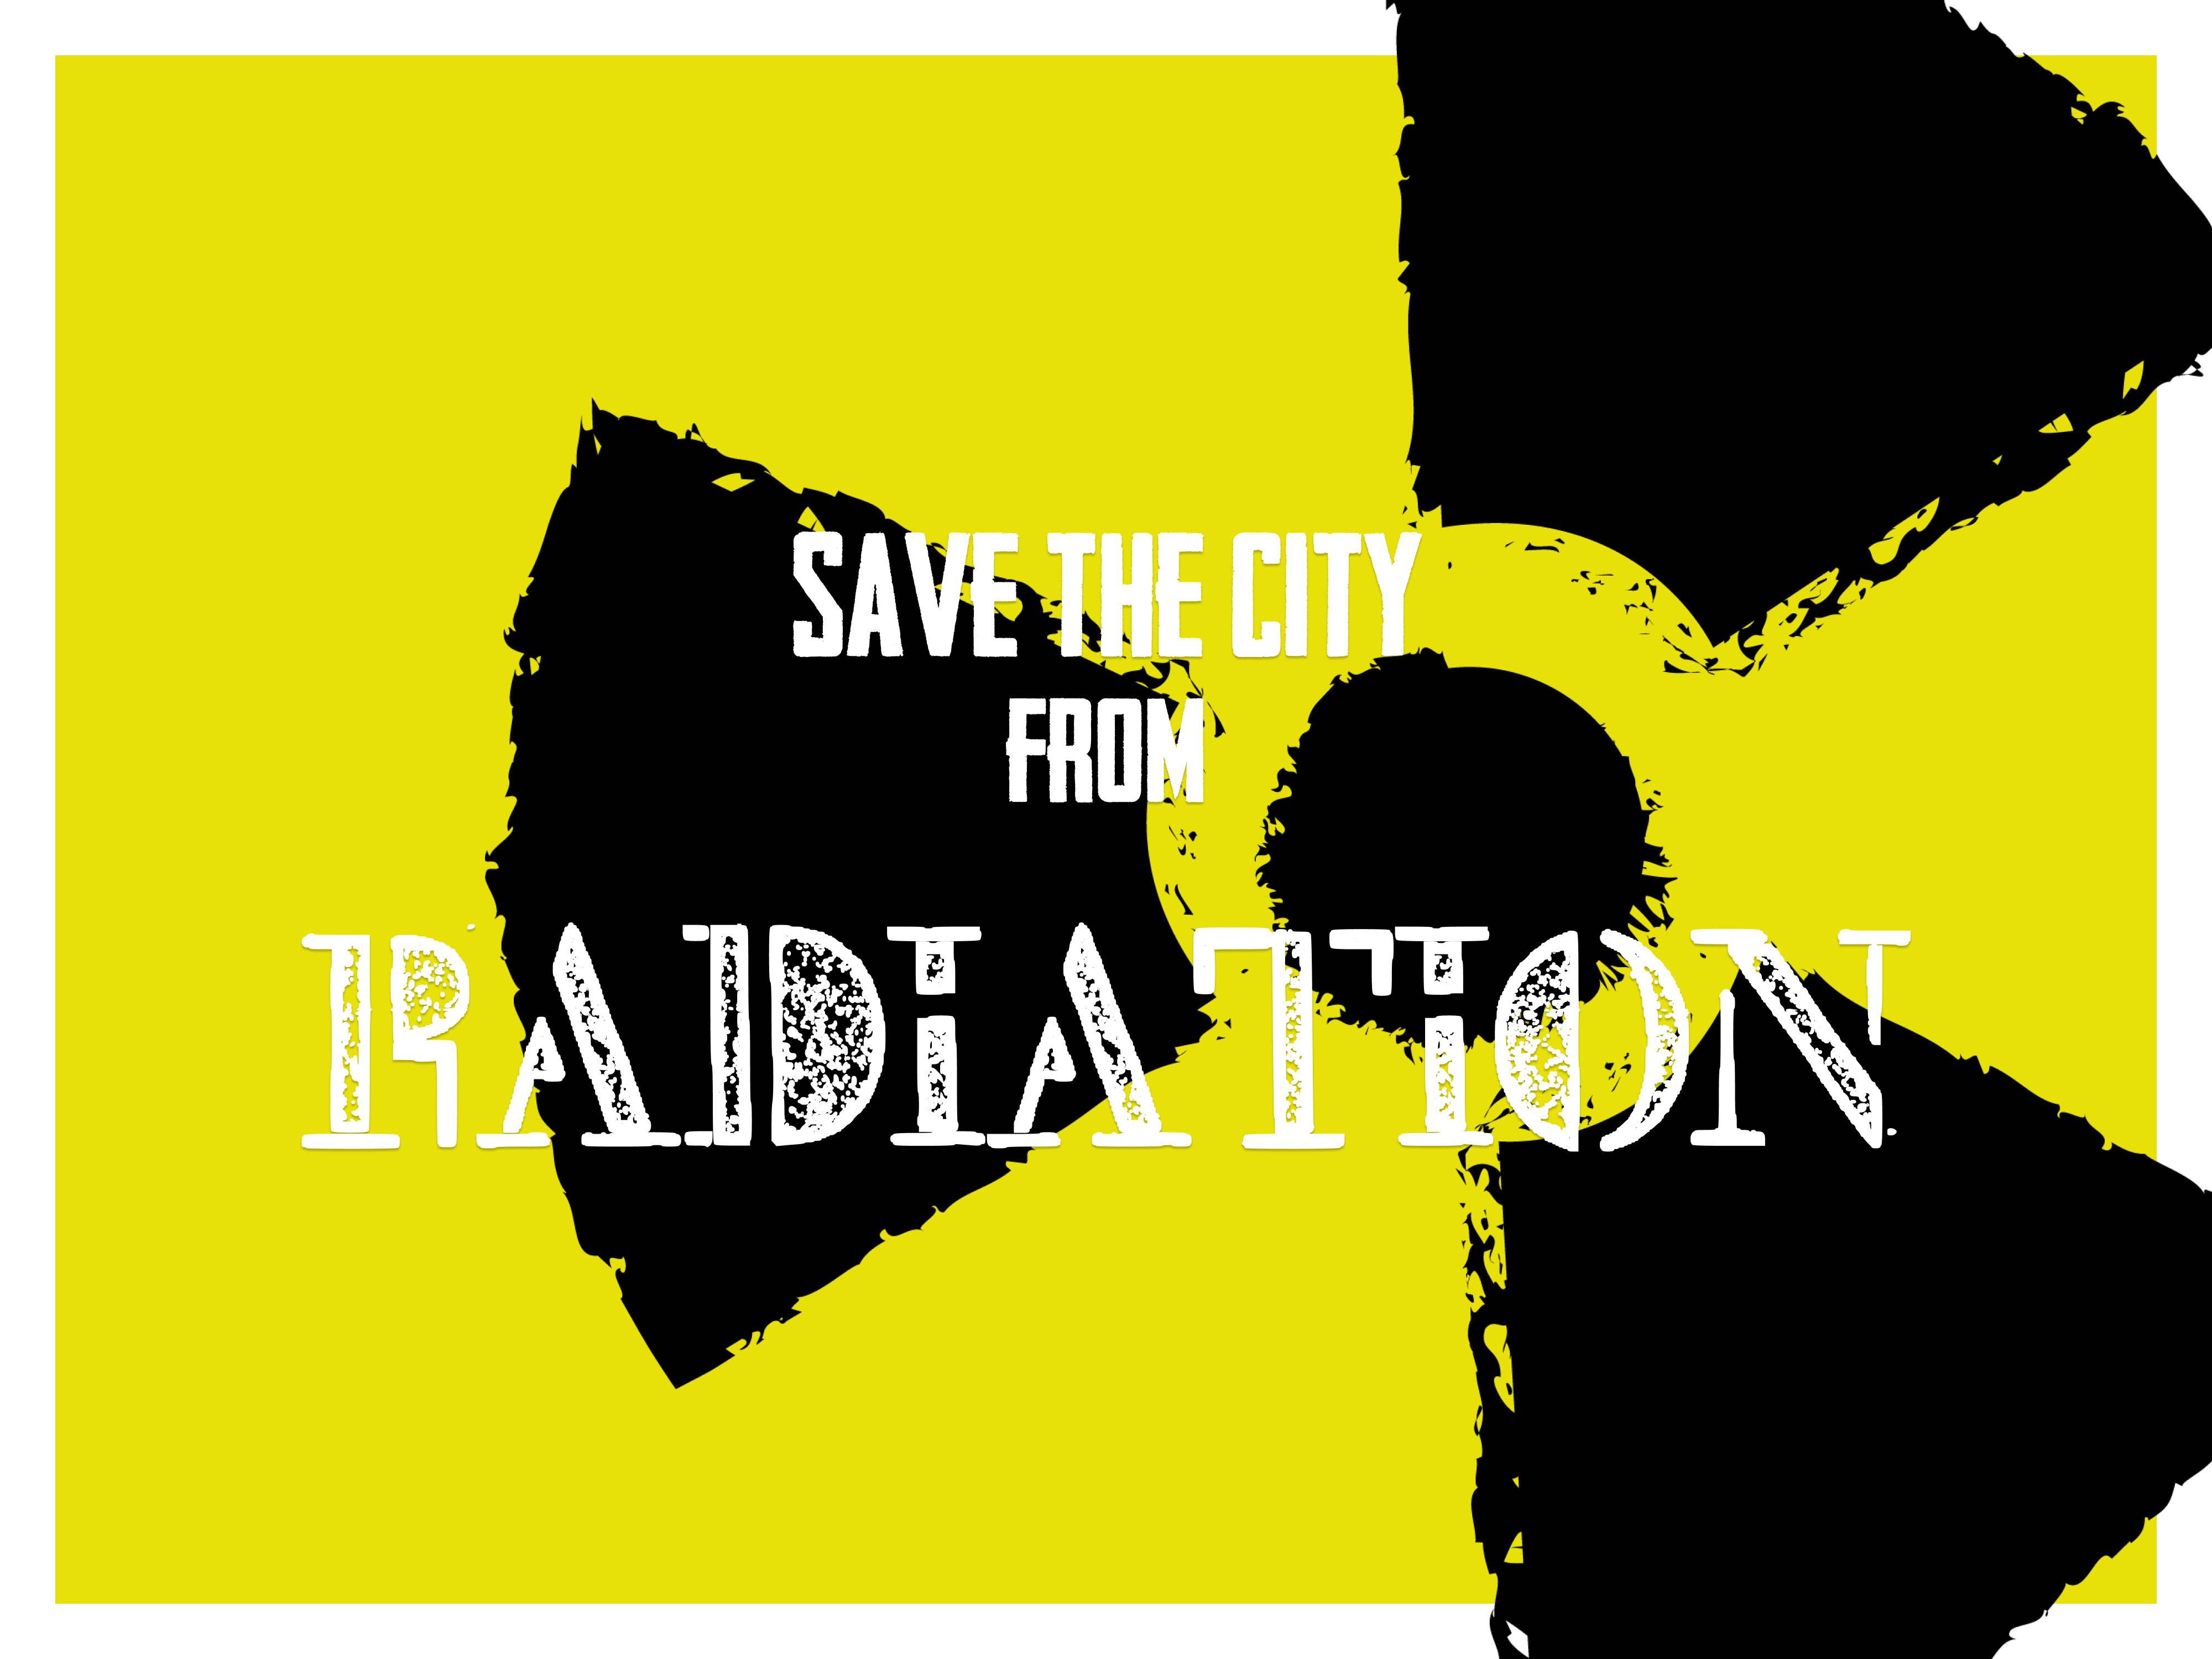 Thumbnail for the project Save the City From Radiation